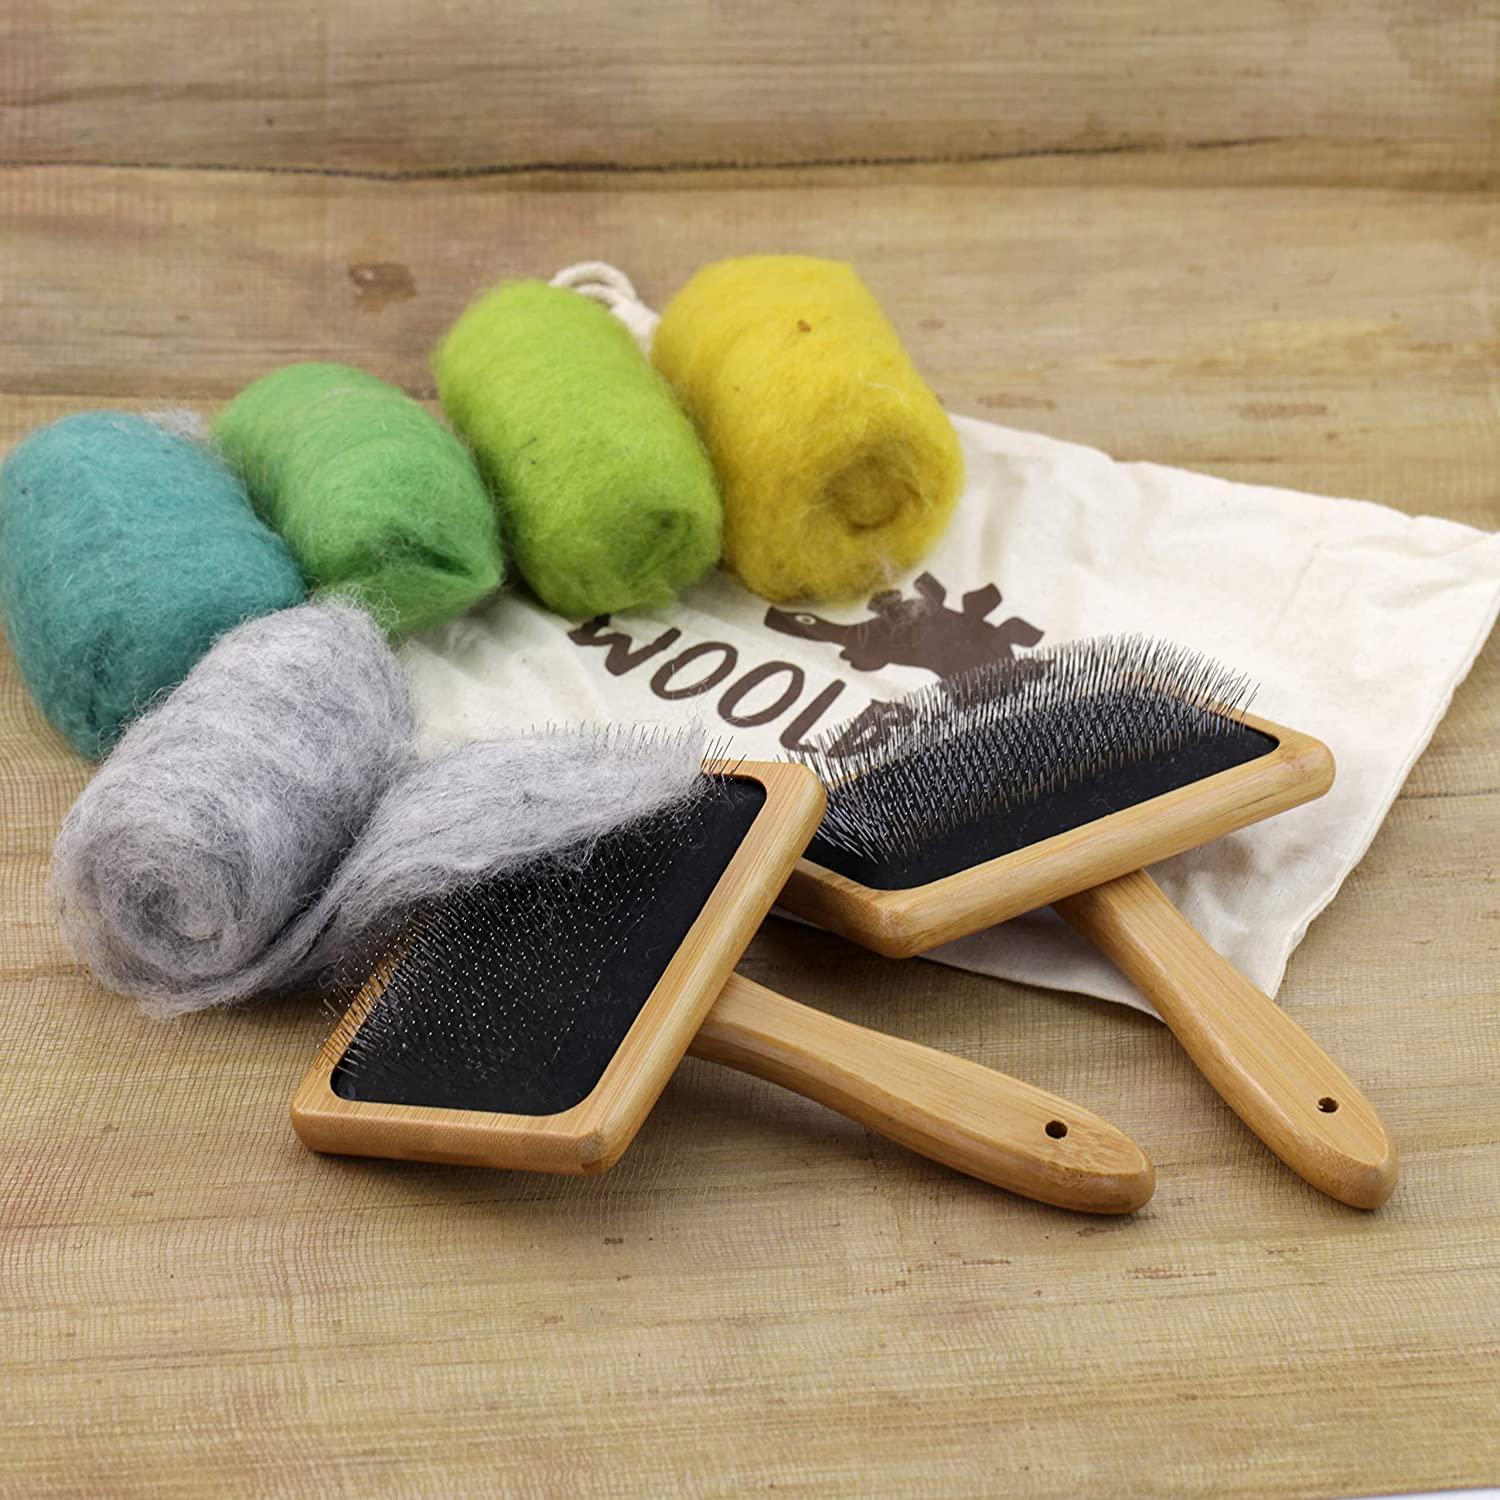 Woolbuddy Wool Carders Large, Hand Carders for Wool, 2 Pcs Needle Felting Tools, Slicker Brush for Dogs, Spinning and Weaving, Carding Brushes for